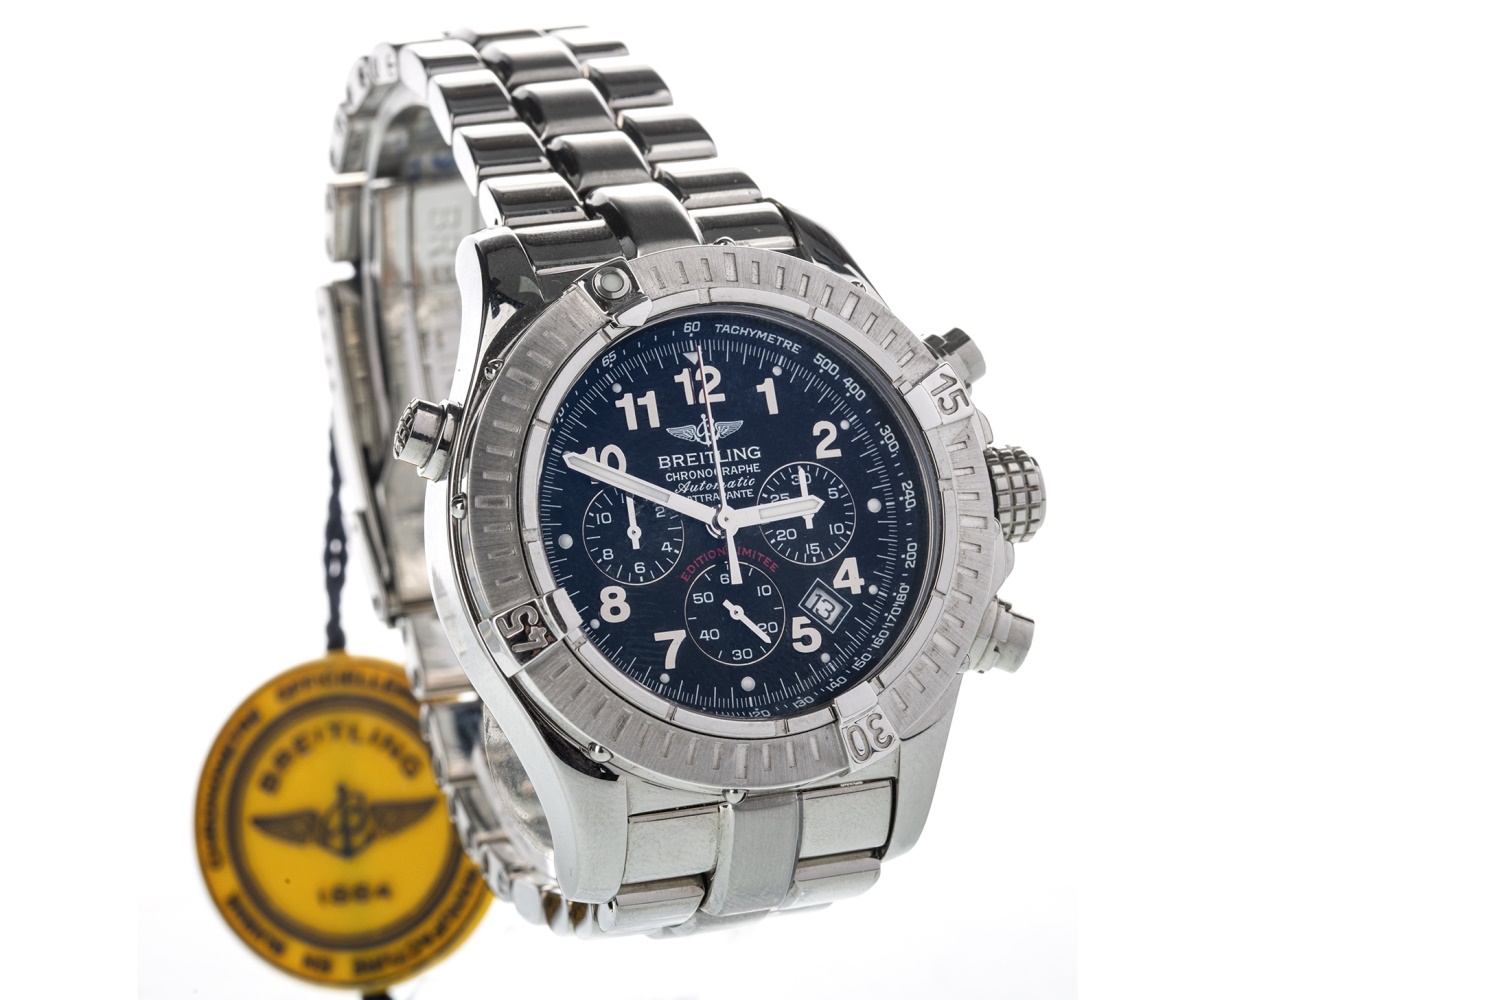 A GENTLEMAN'S BREITLING CHRONOGRAPH RATTRAPANTE STAINLESS STEEL AUTOMATIC WRIST WATCH - Image 4 of 4